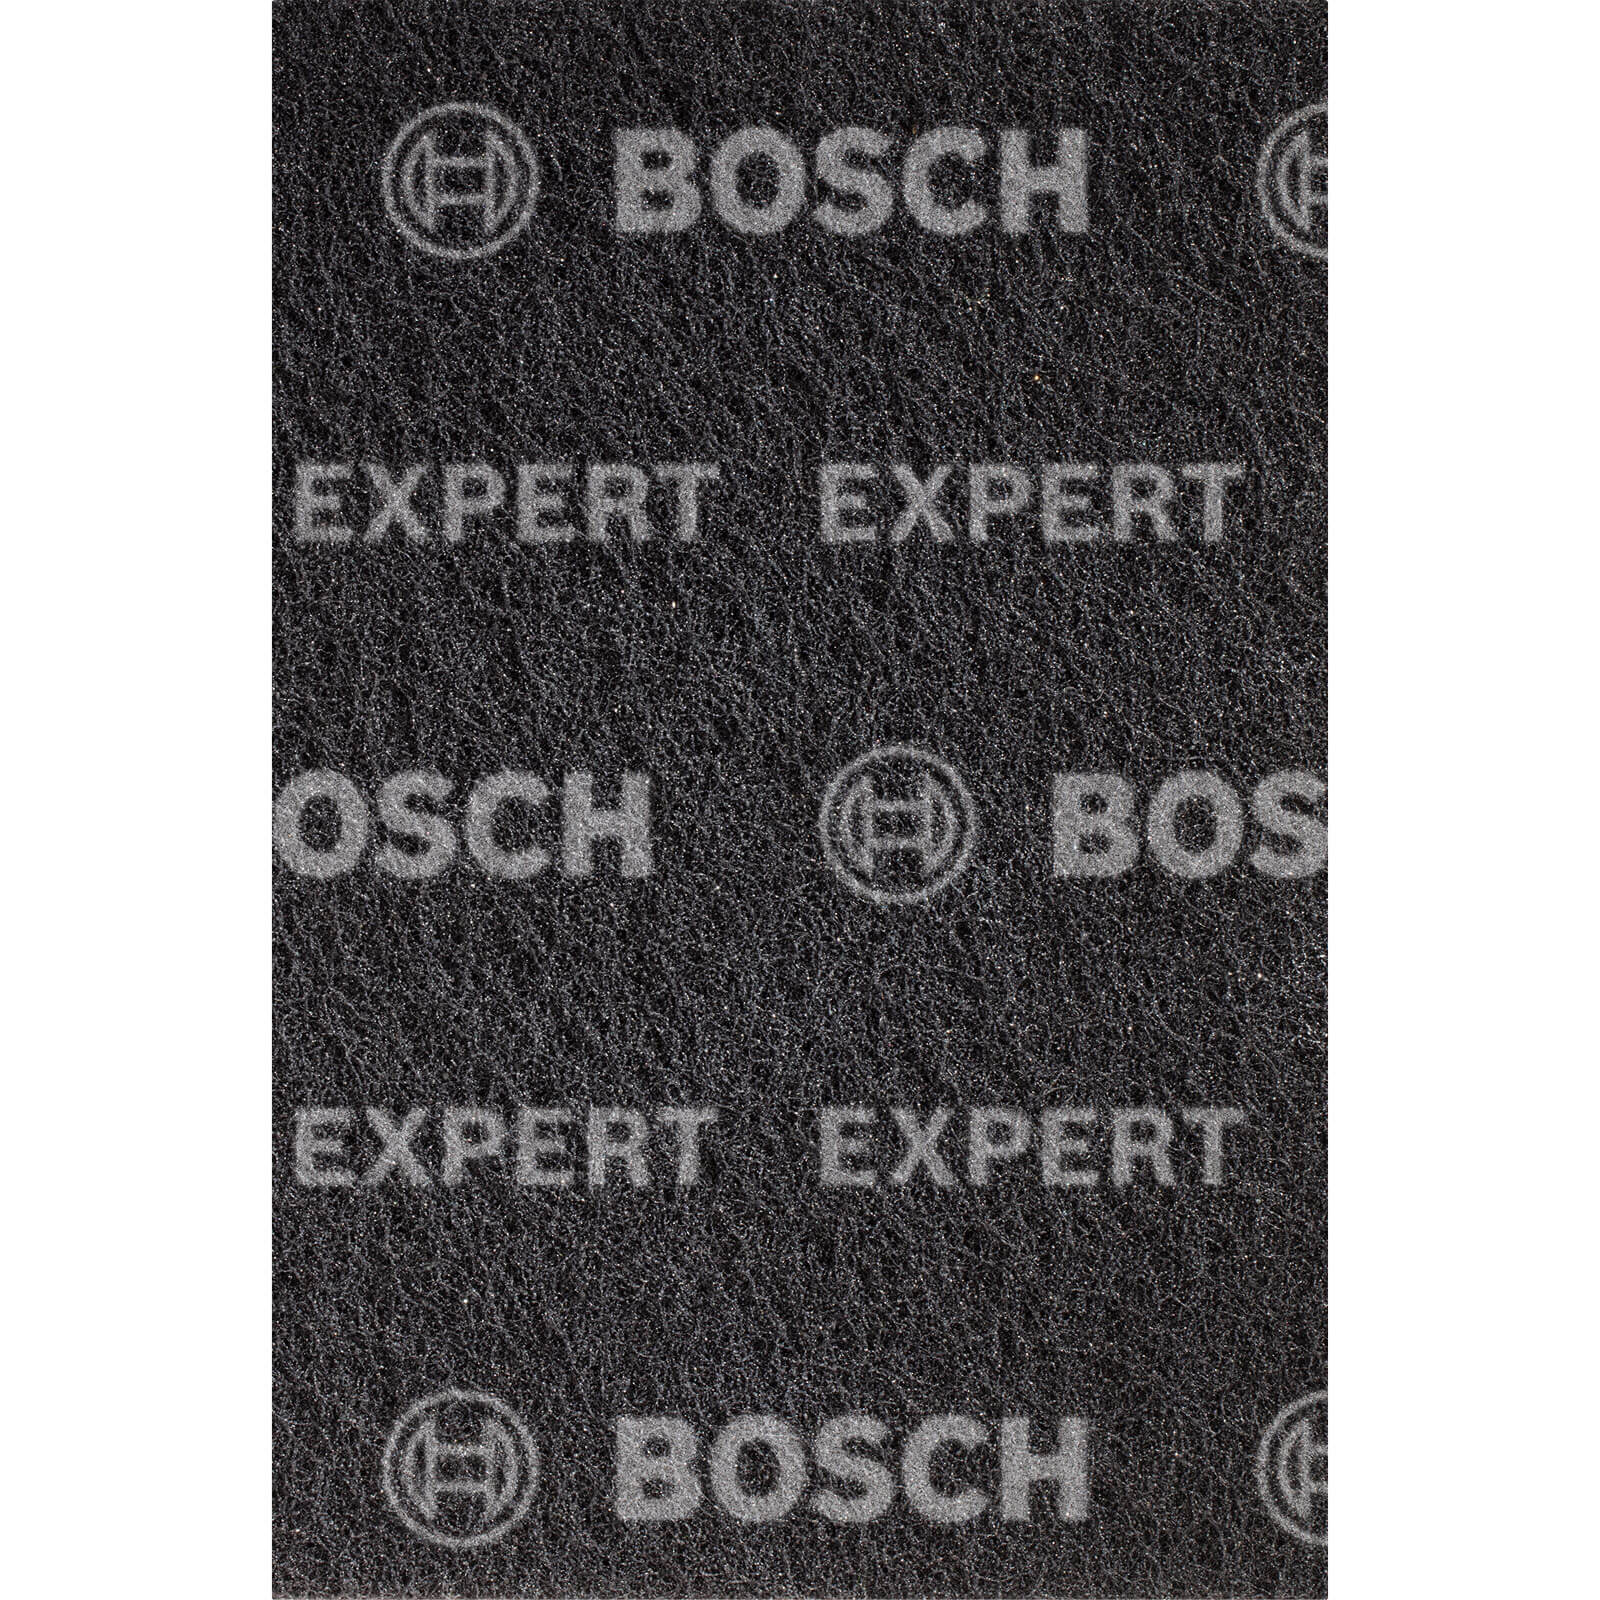 Image of Bosch Expert N880 Fleece Hand Pad Extra Coarse Pack of 1